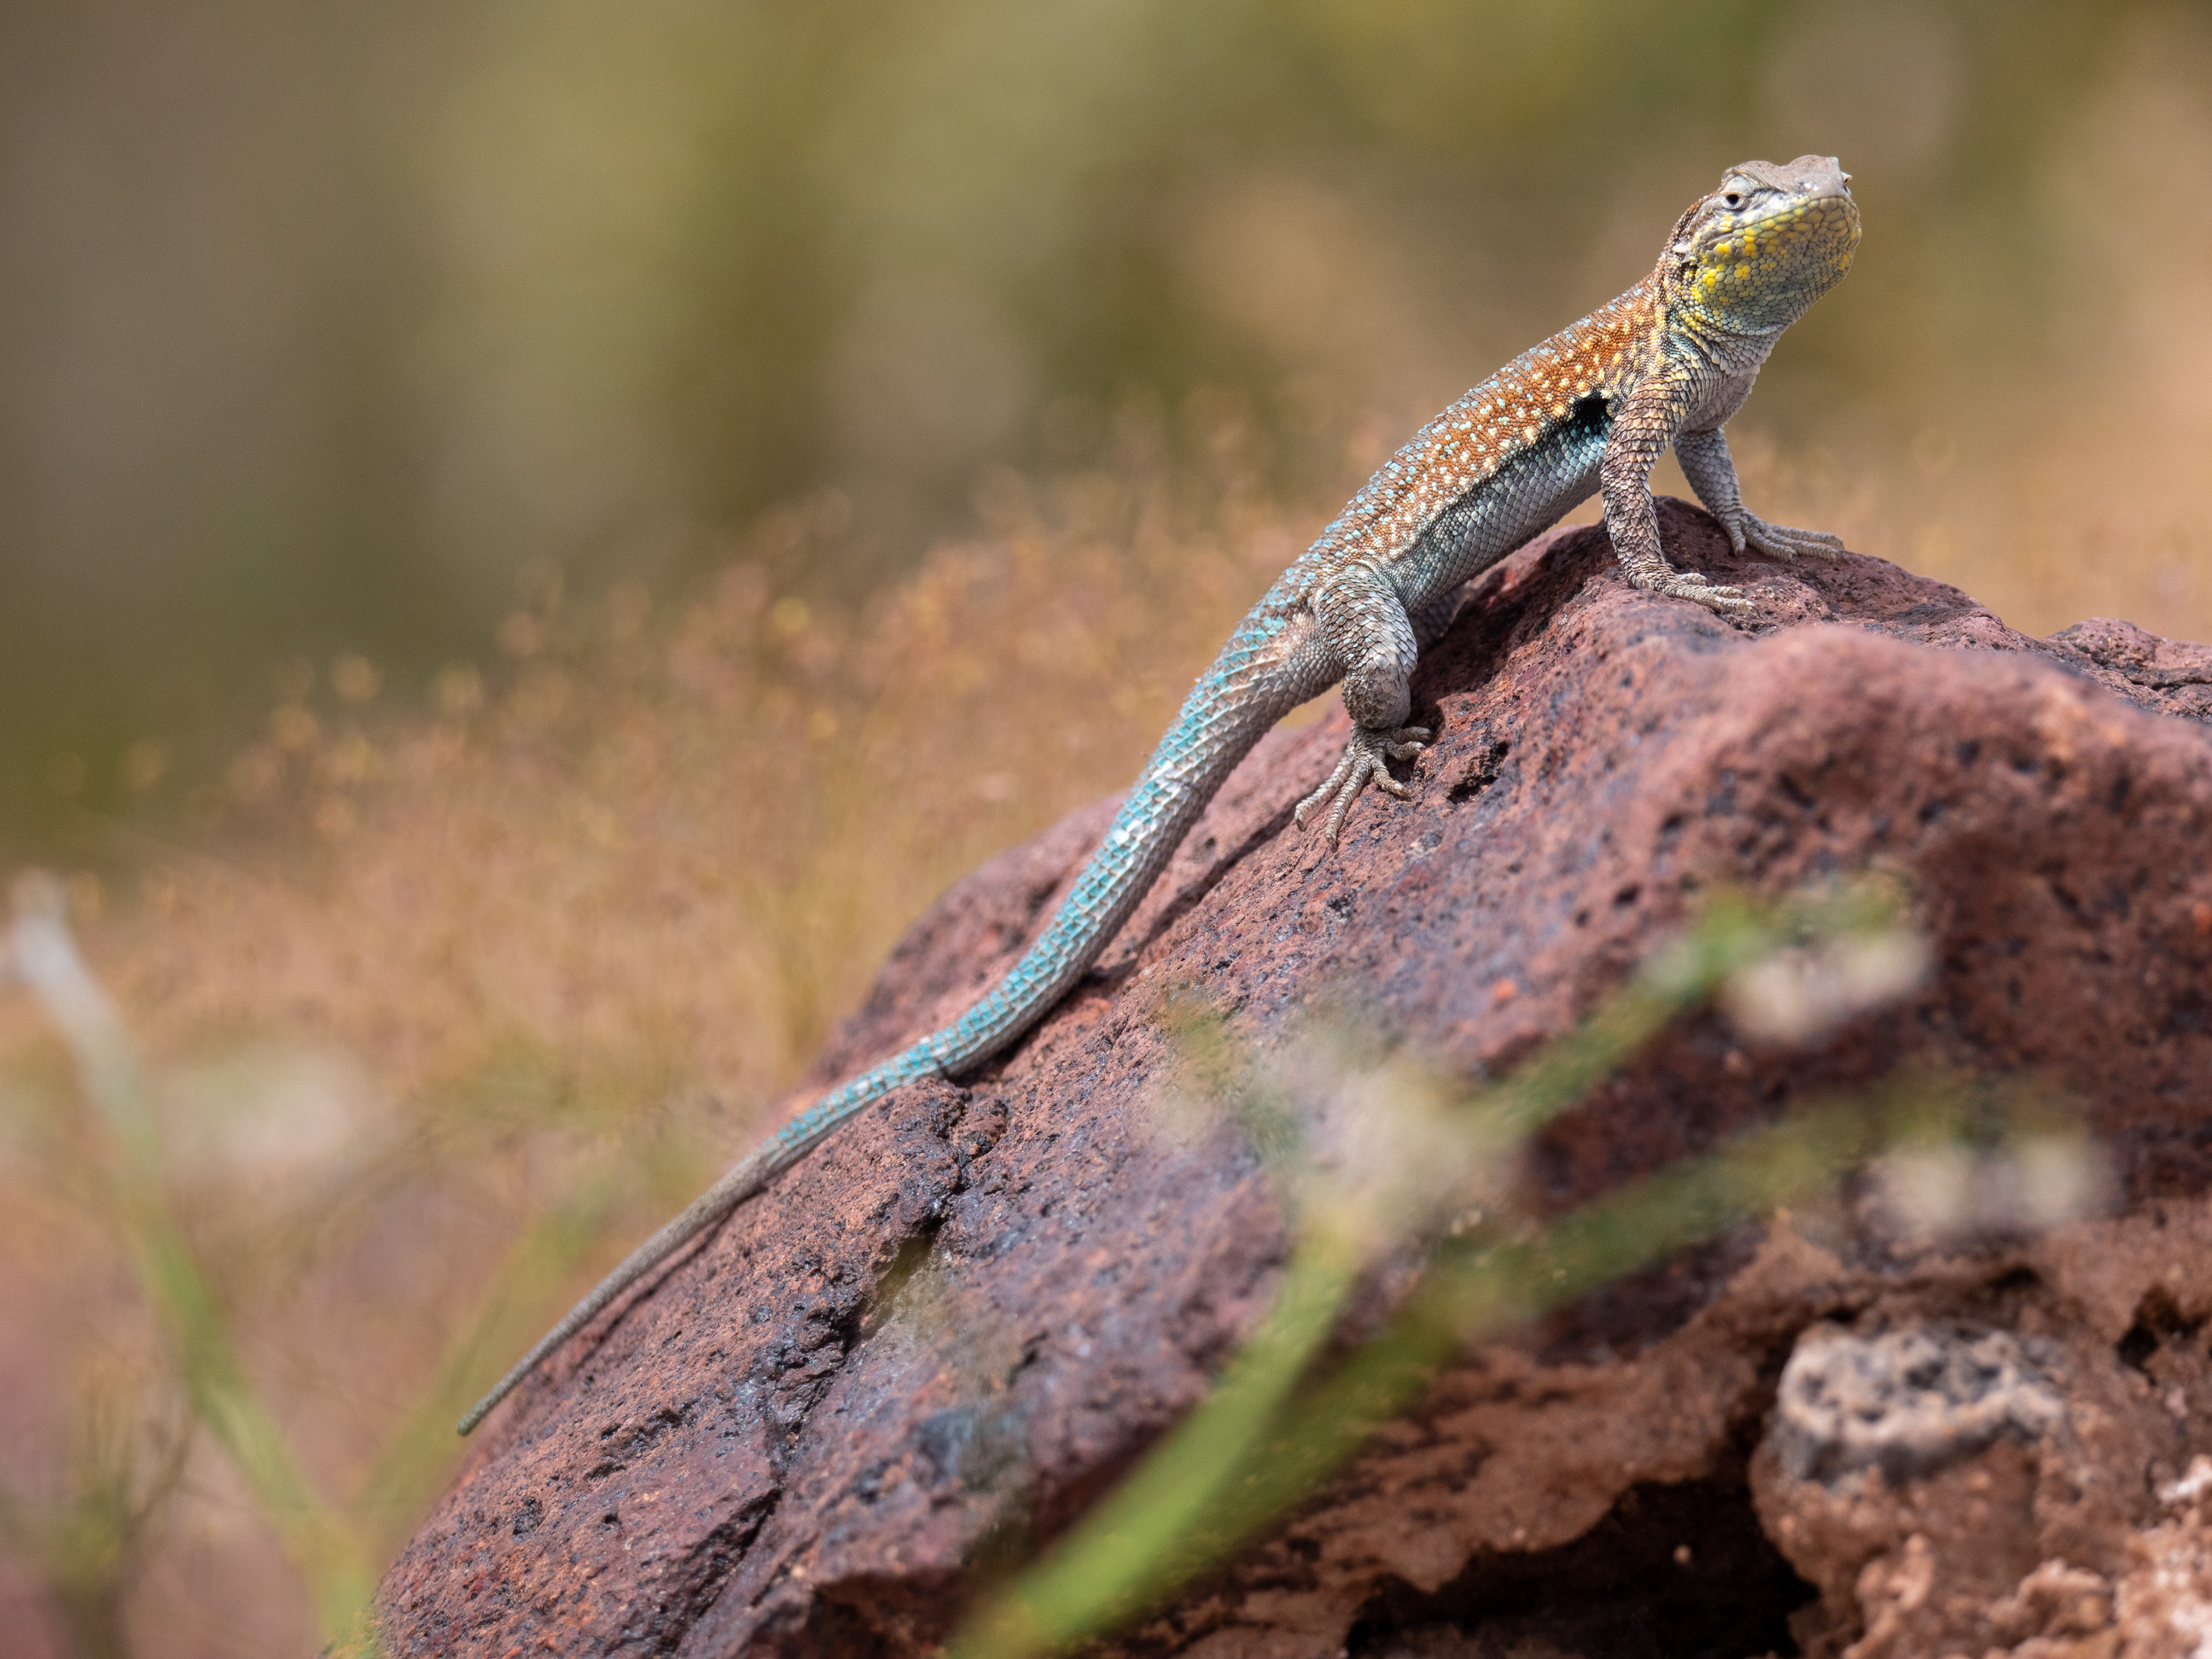 full length view of colorful lizard from side, perched on rock